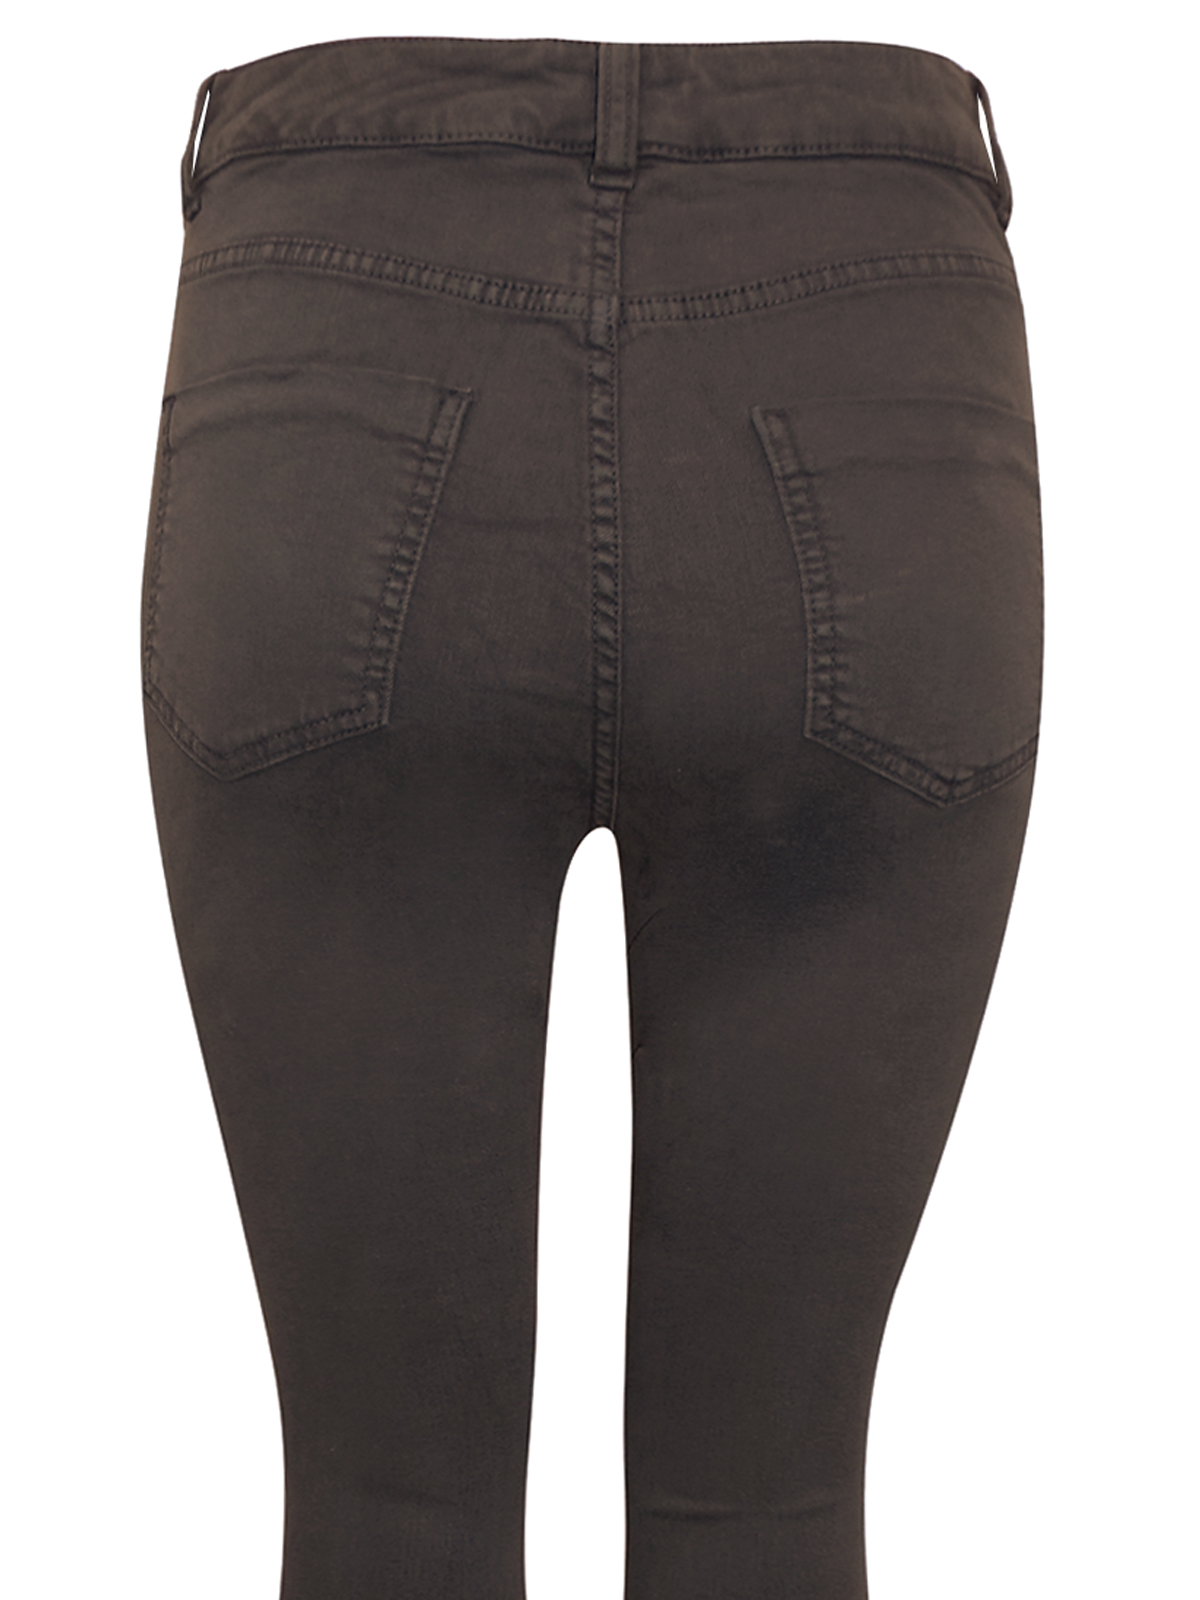 Marks and Spencer - - M&5 CHOCOLATE High Waisted Skinny Jeans - Size 8 ...